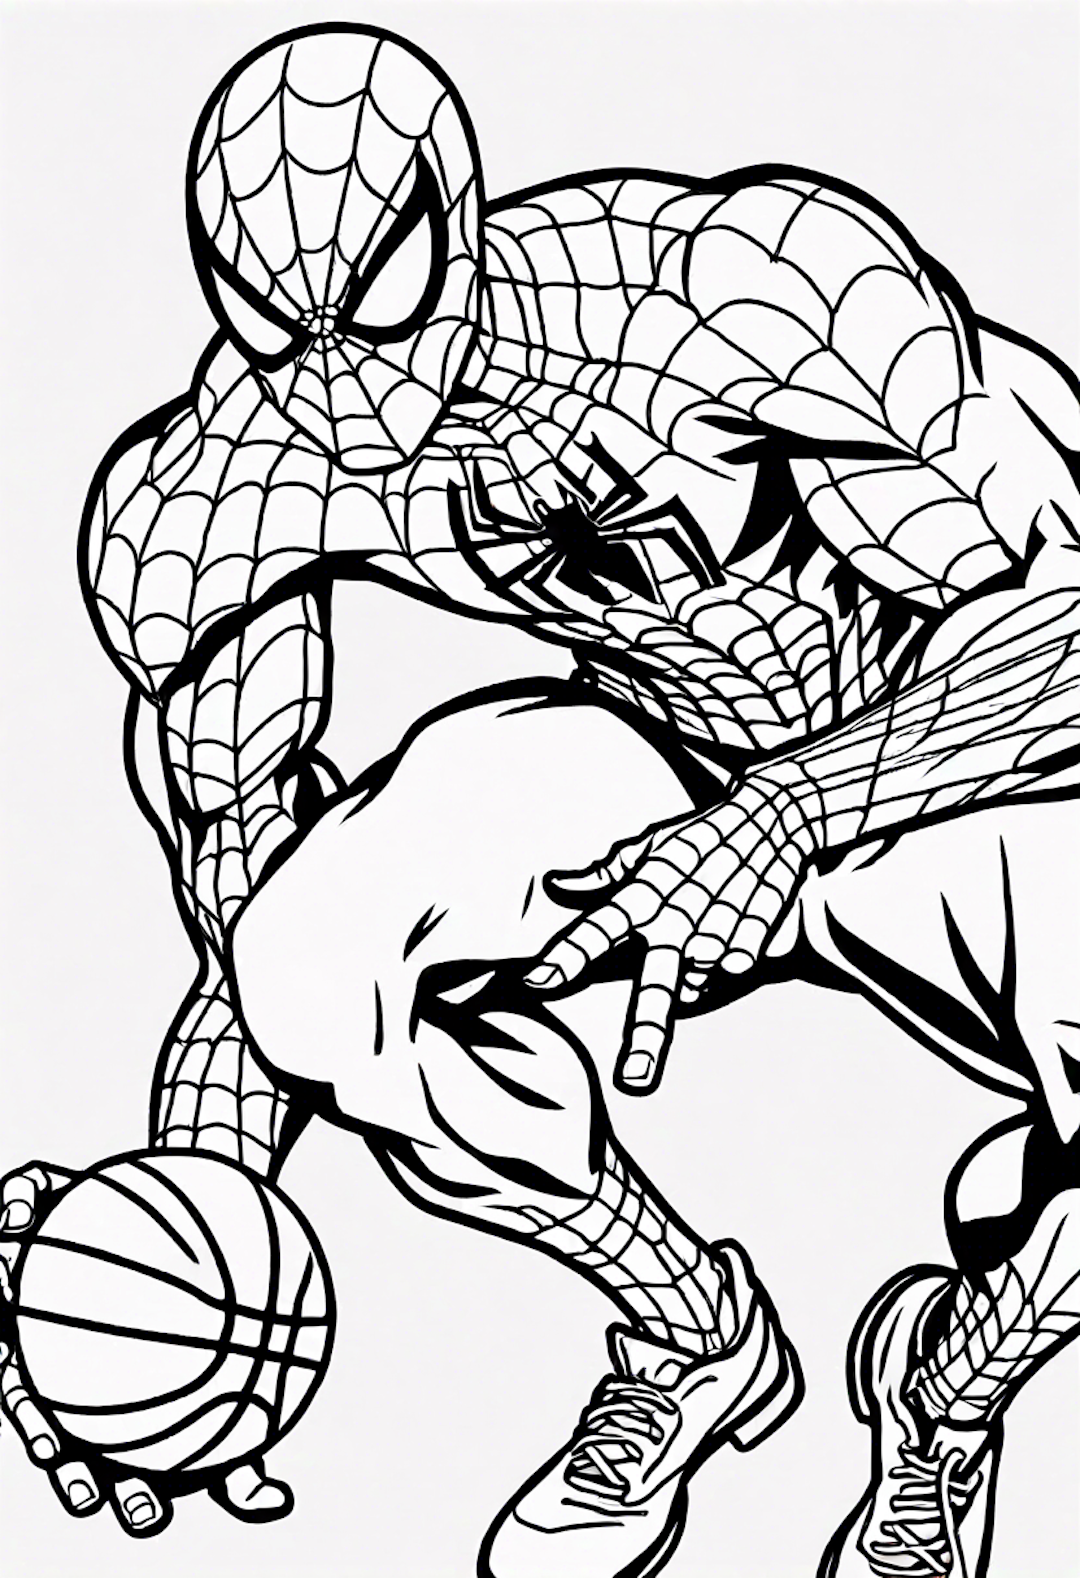 Spiderman In A Basketball Match With Flash Thompson